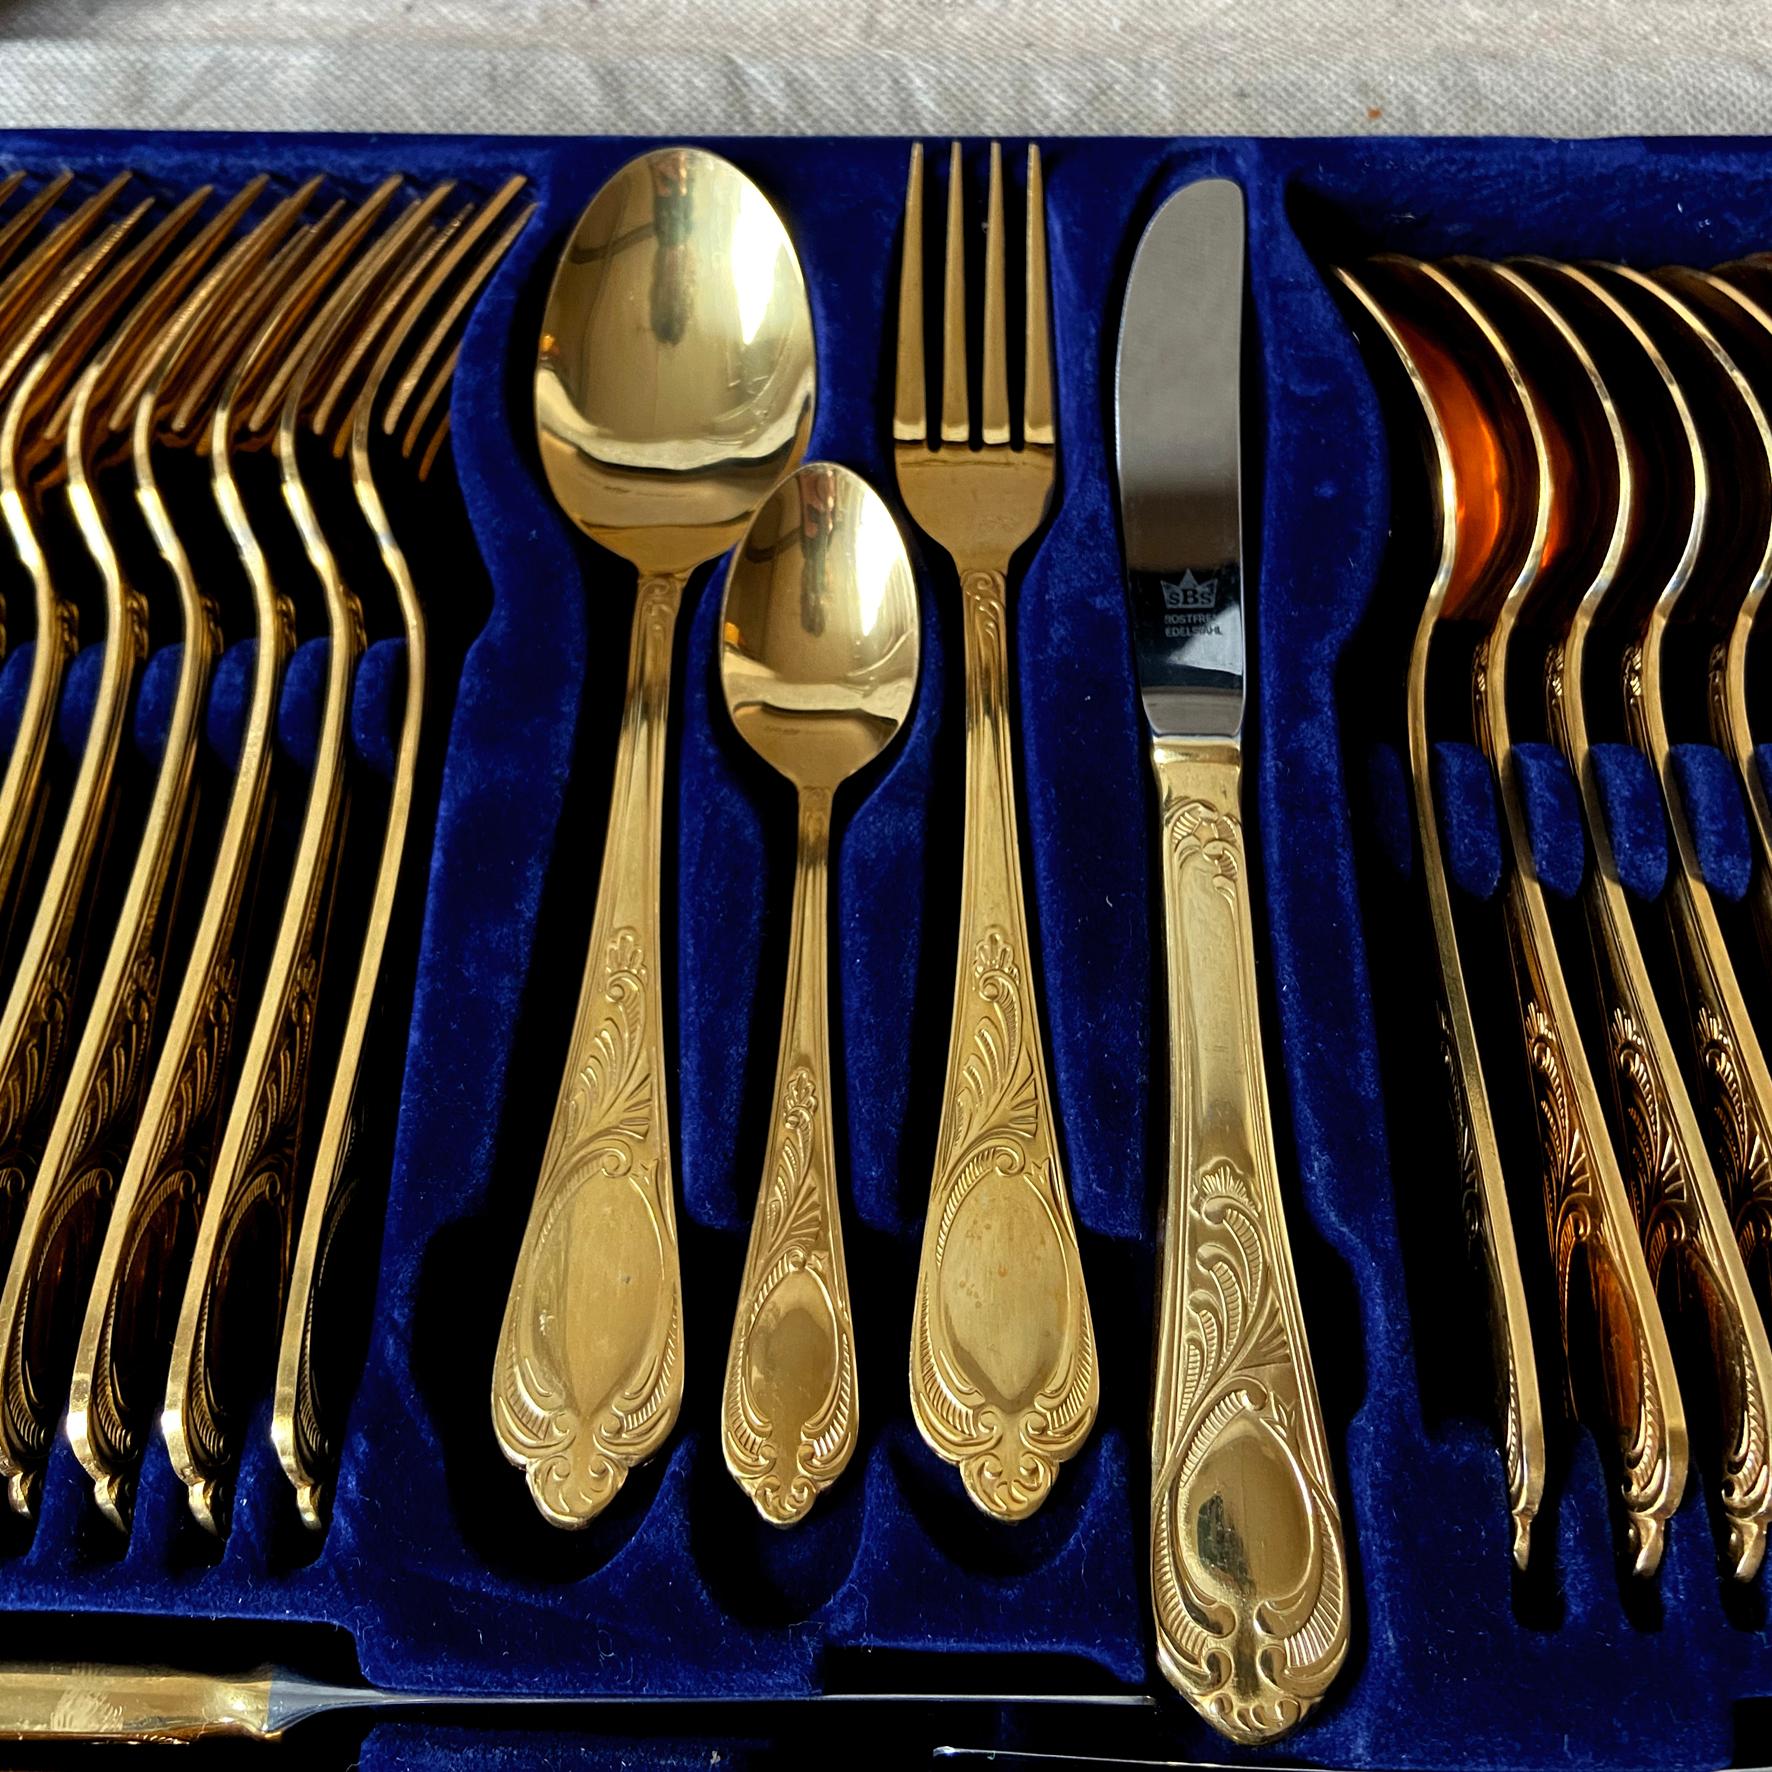 Bestecke Solingen German 23/24 Karat gold-plated 12 person cutlery set in carry case.
Items are individually marked with 